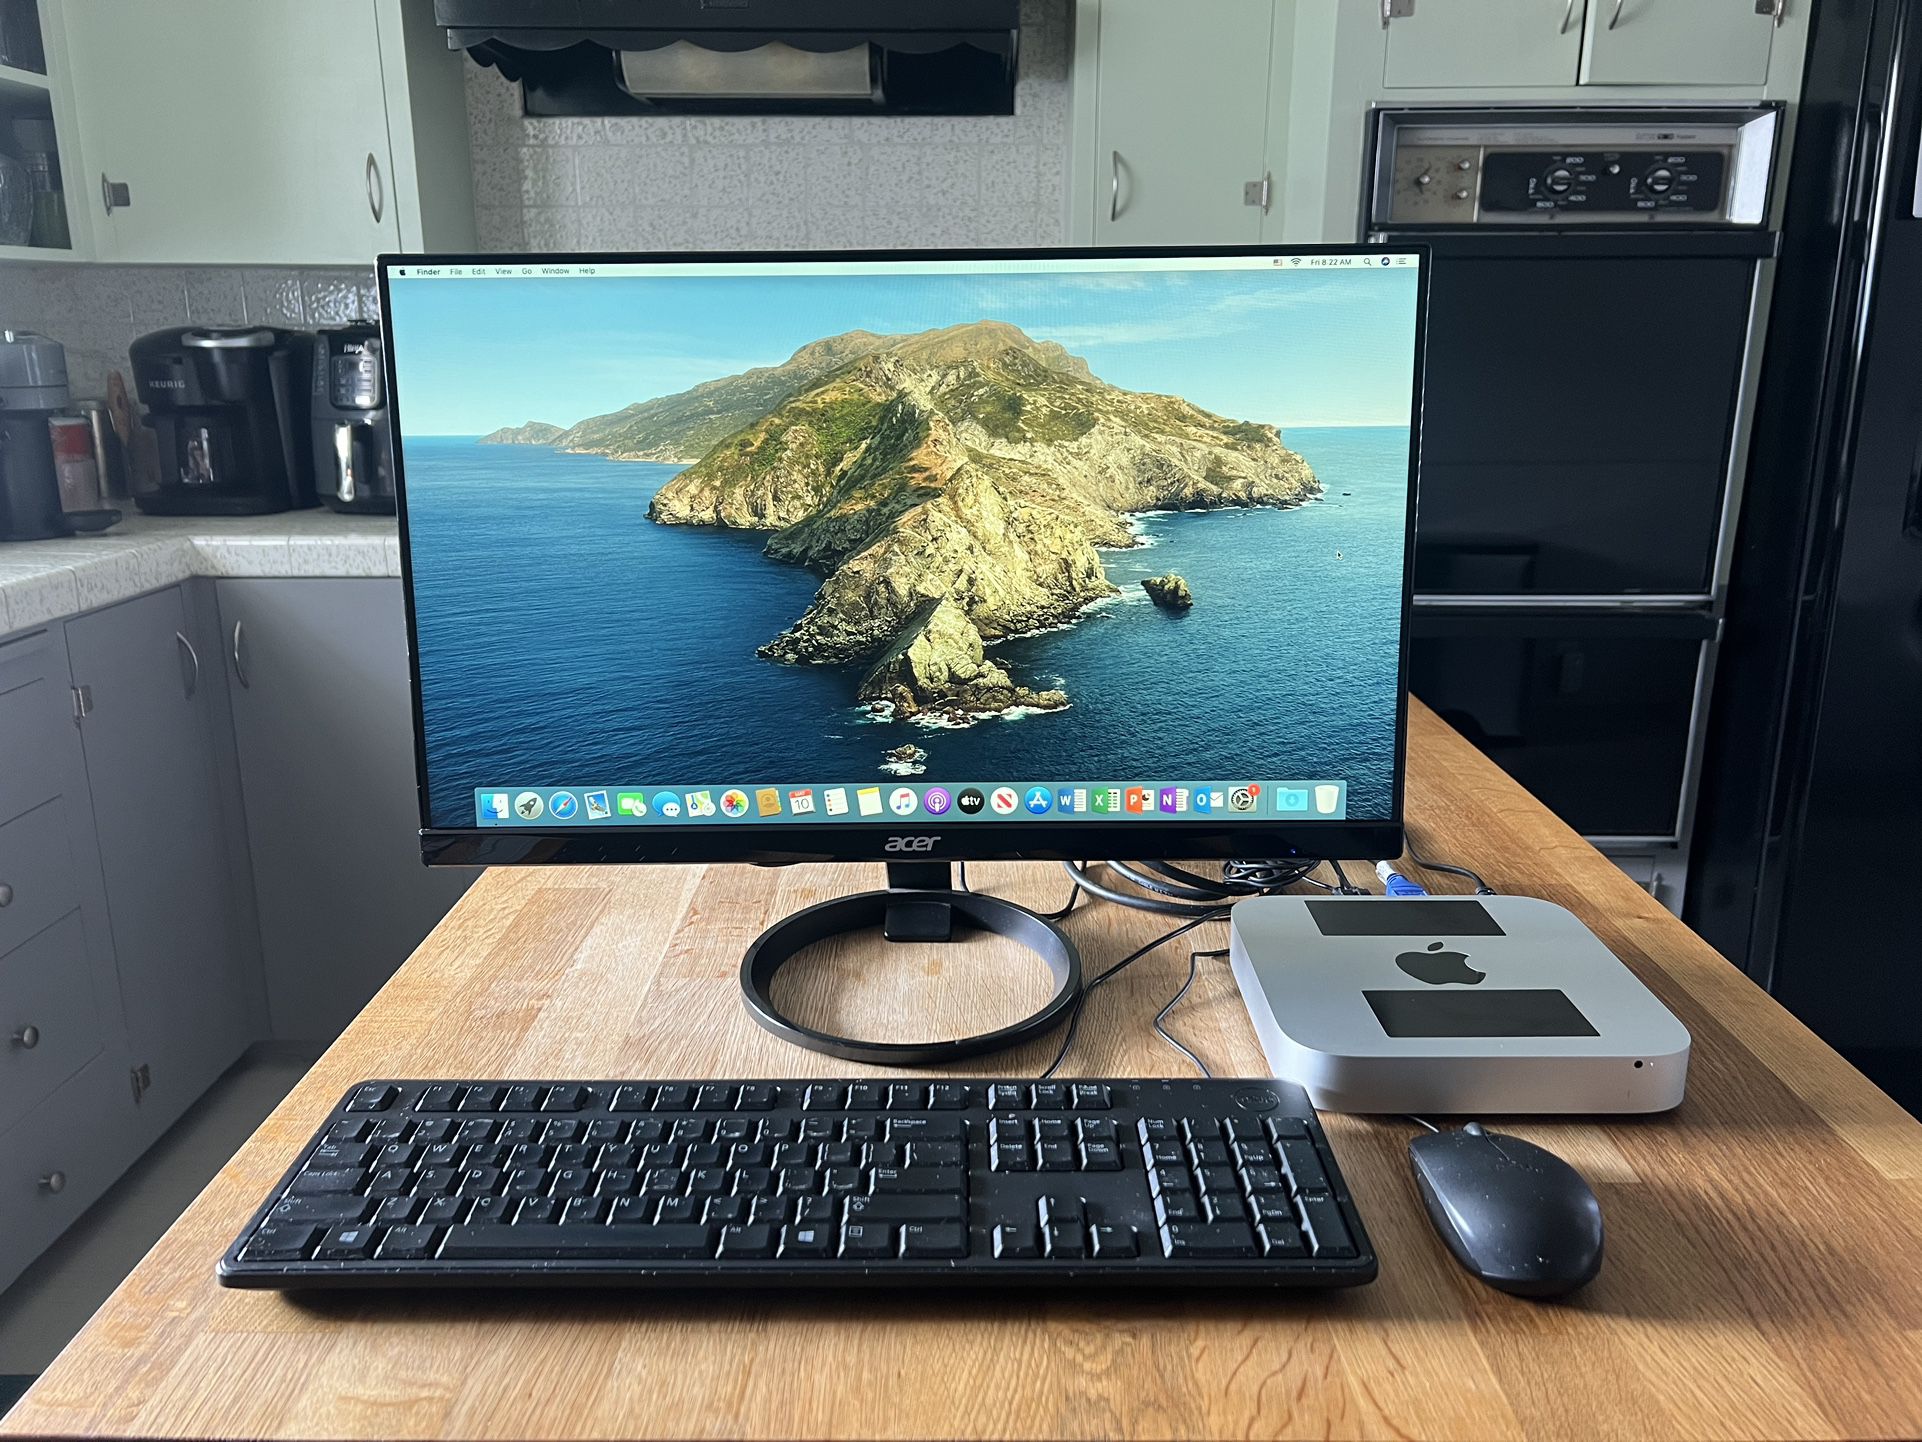 Apple Mac Mini Desktop Computer With Acer Monitor, Keyboard And Mouse - Intel i5 / 4GB Memory / 1TB Hard Drive / MS Office Installed 